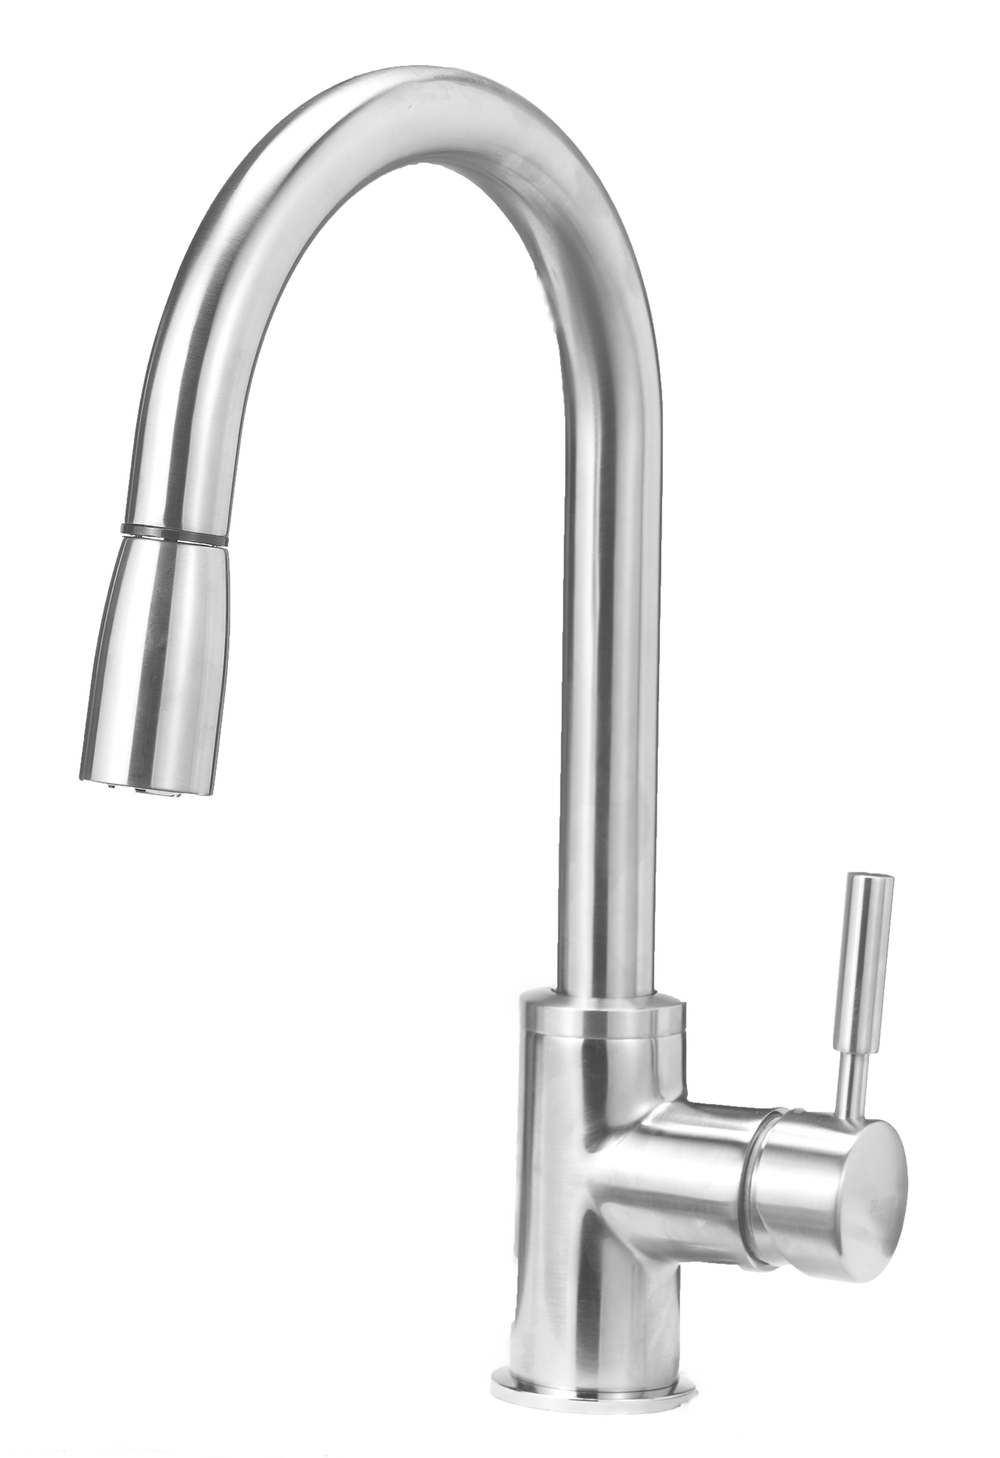 MUST HAVE BLANCOs Luxury Sinks Faucets And Accessories DESIGNED